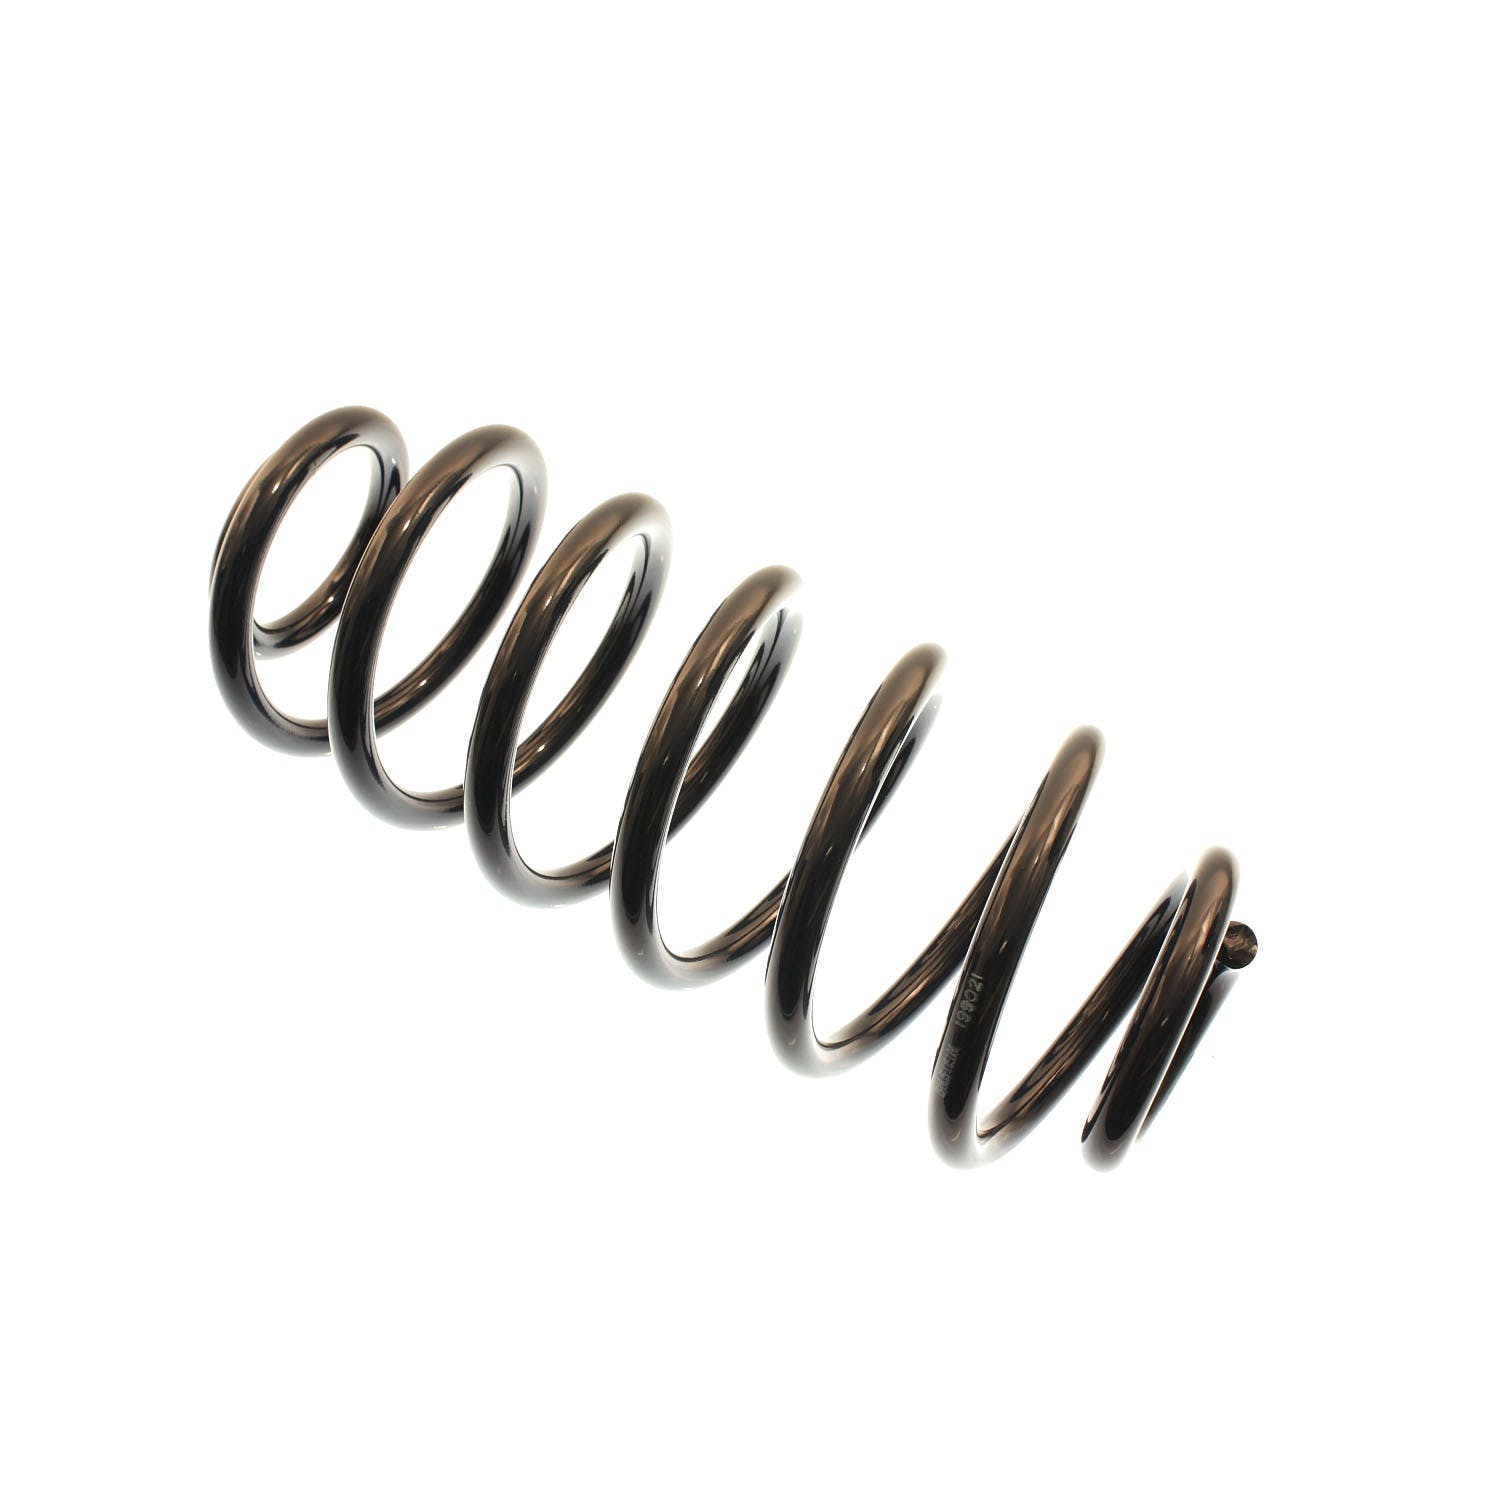 Bilstein 199021 B3 OE Replacement Coil Springs